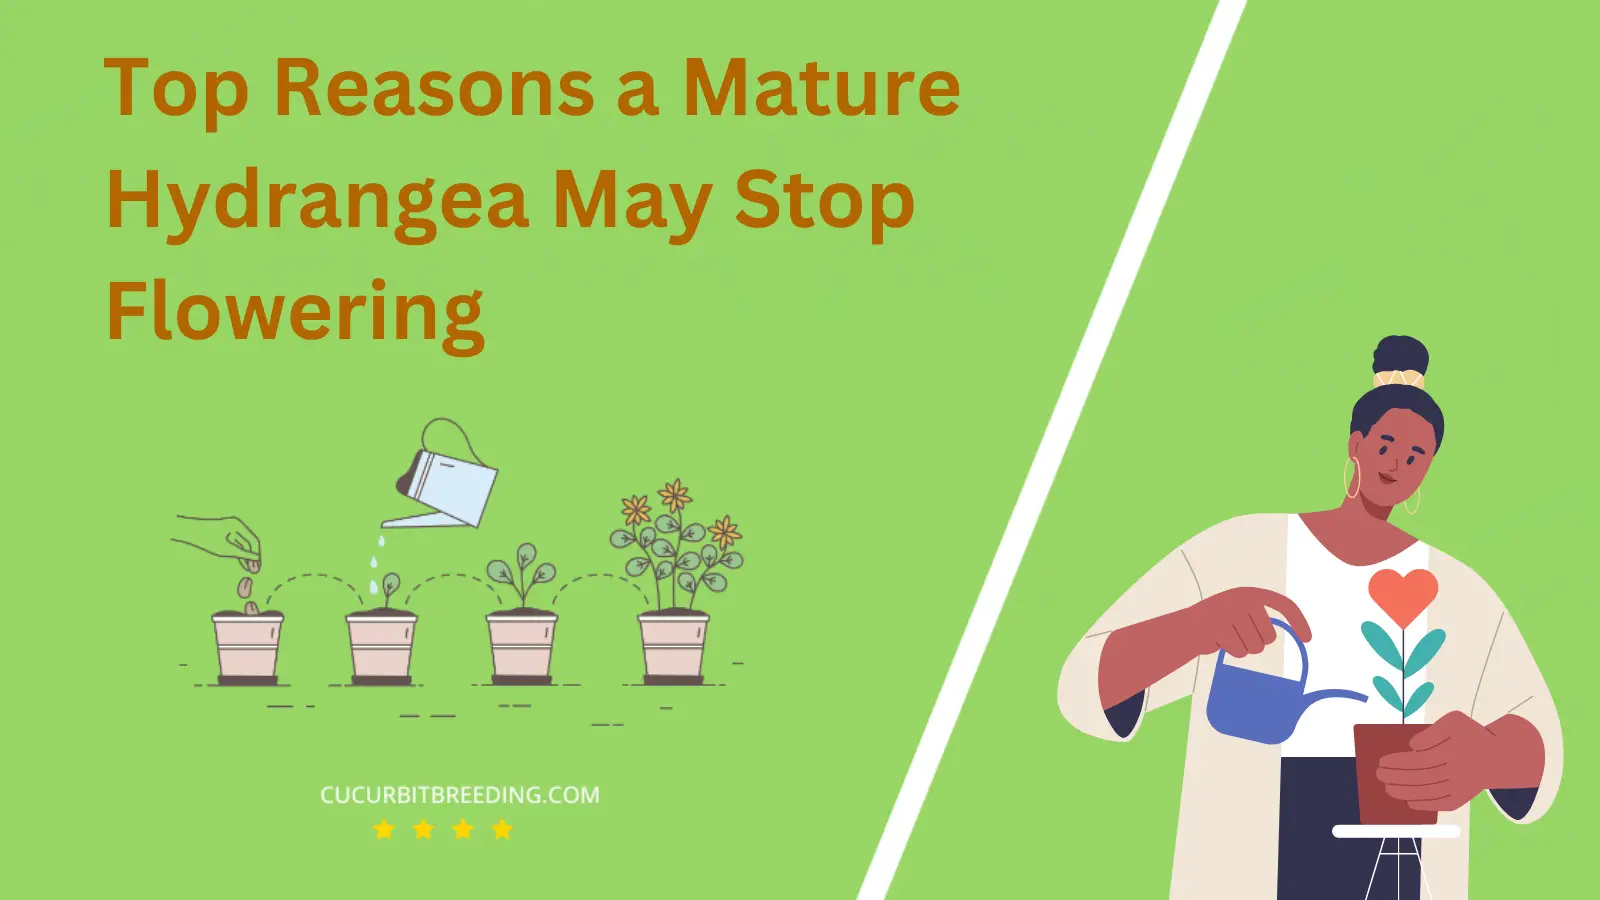 Top Reasons a Mature Hydrangea May Stop Flowering